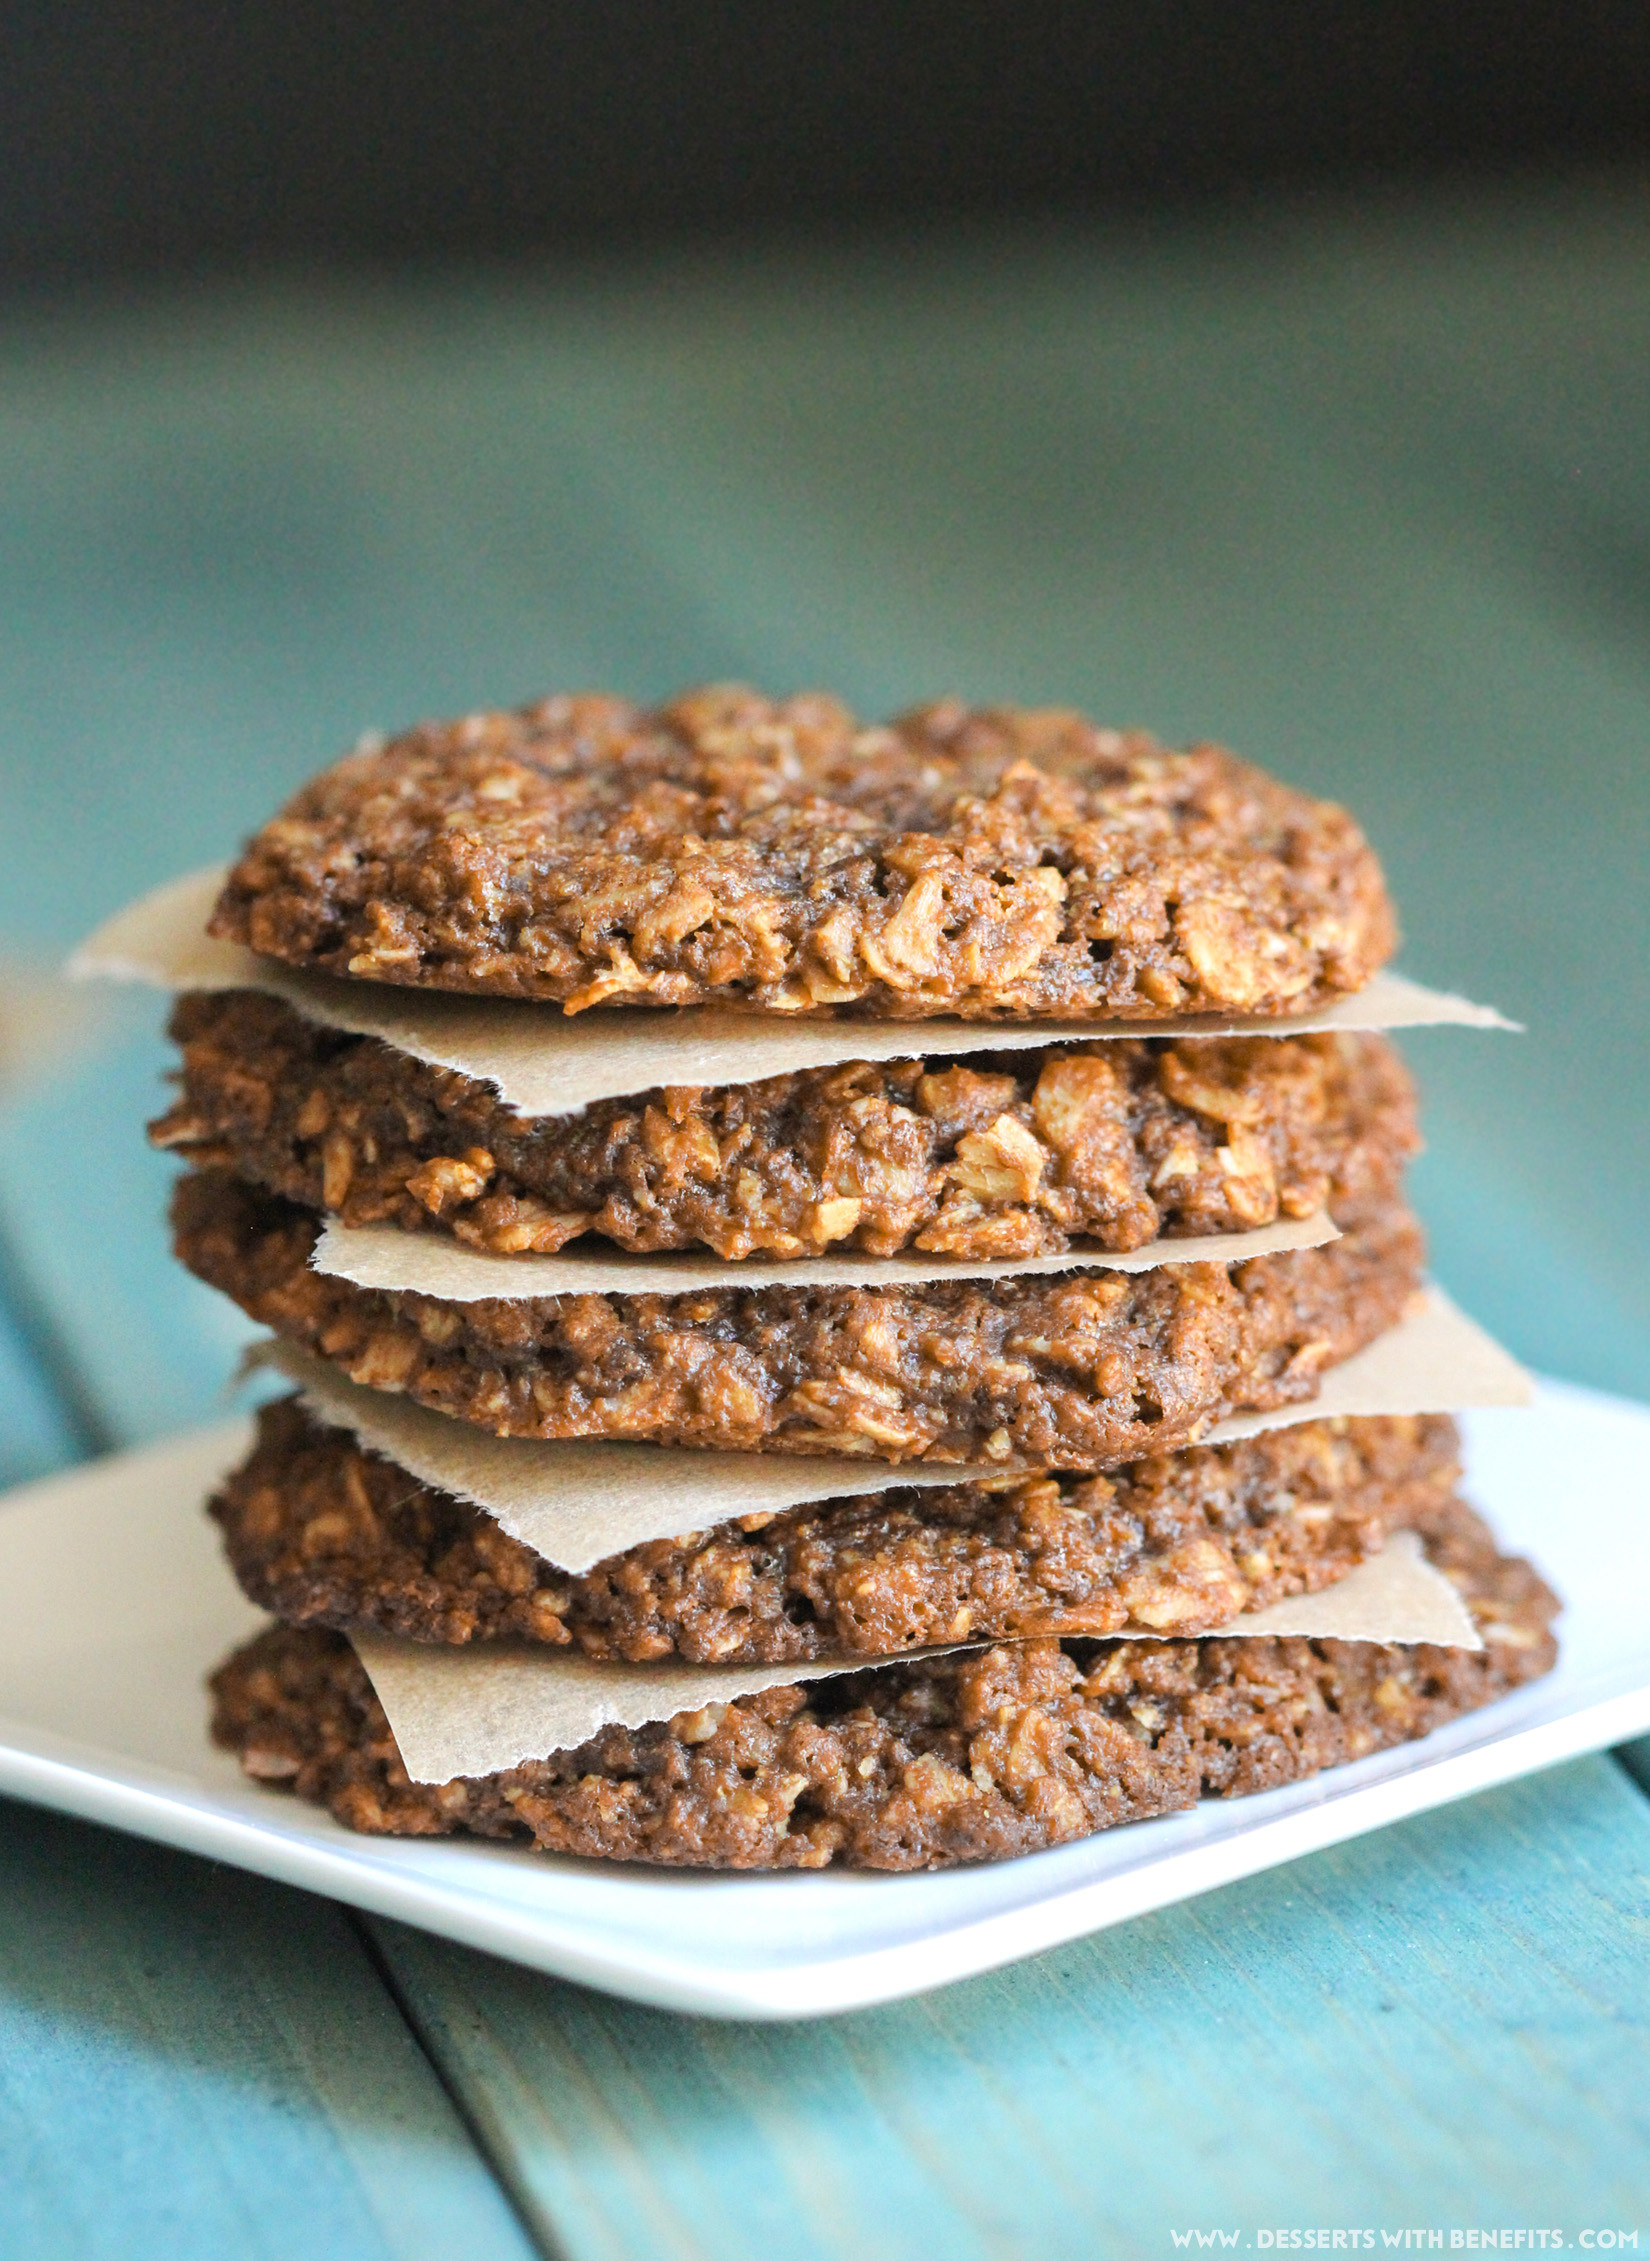 Healthy Peanut Butter Oatmeal Cookies
 Healthy Chewy Peanut Butter Oatmeal Cookies recipe gluten